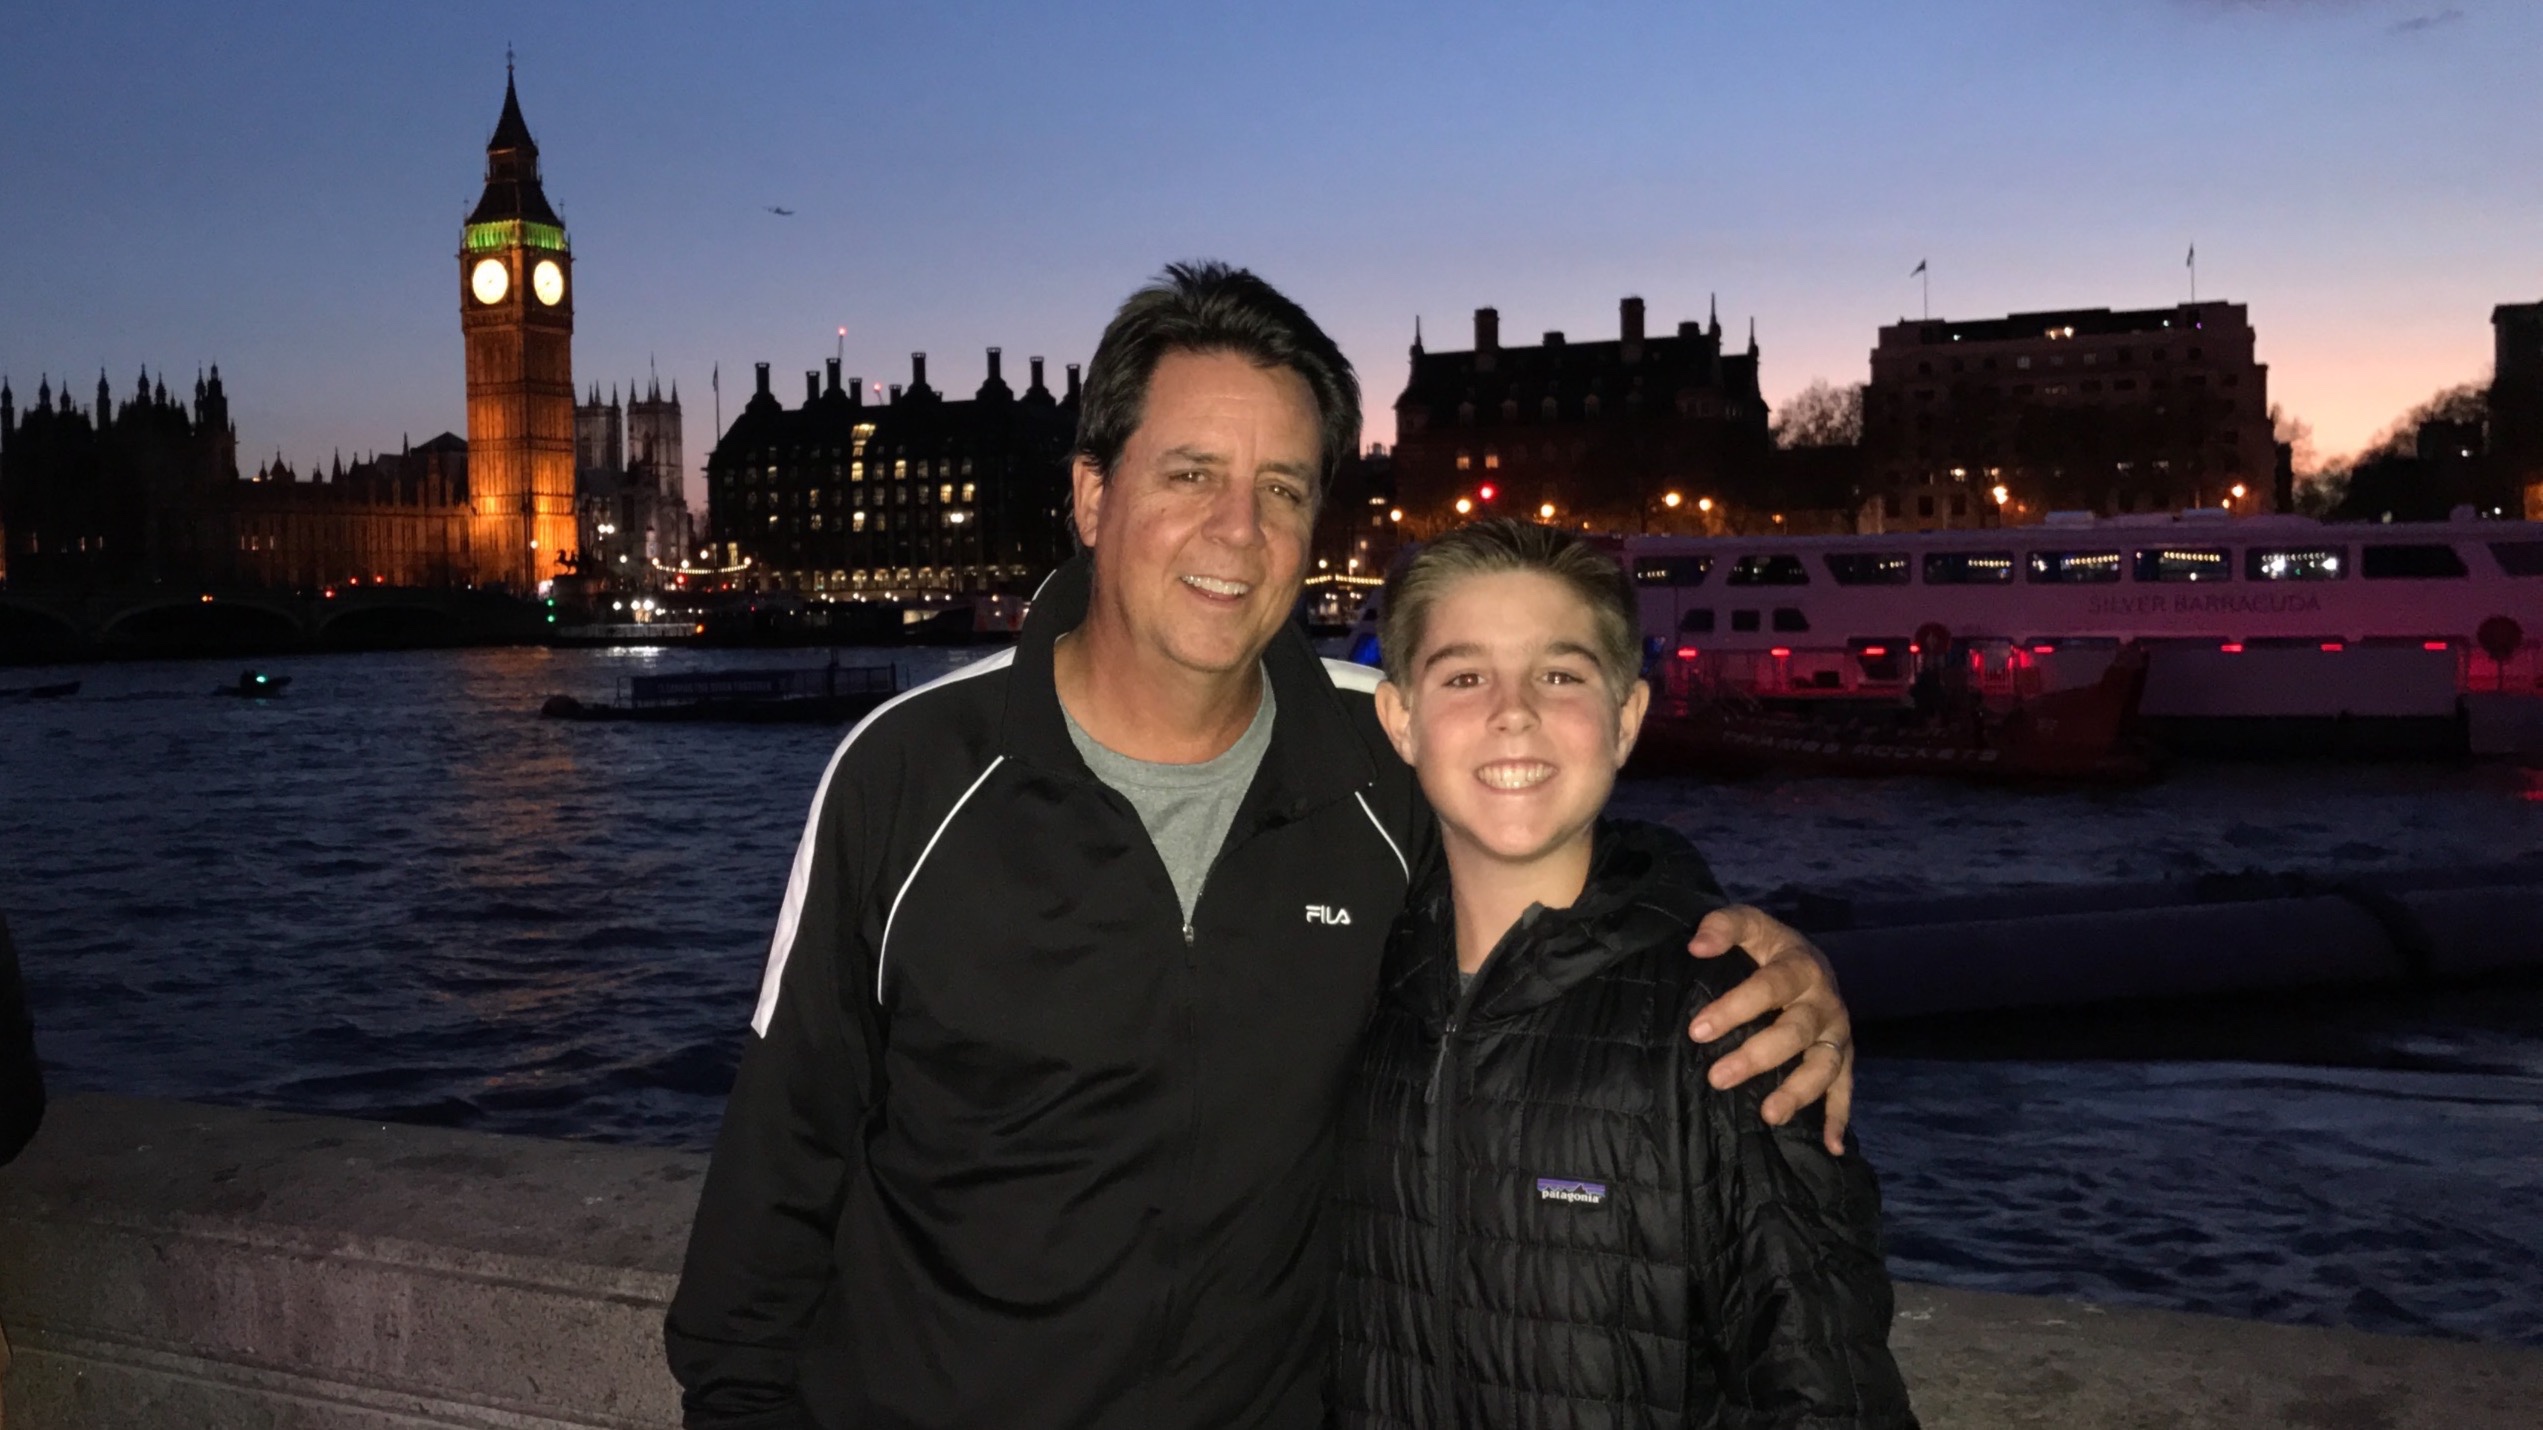 Travis and Tim Hackett enjoy sunset over the Thames River